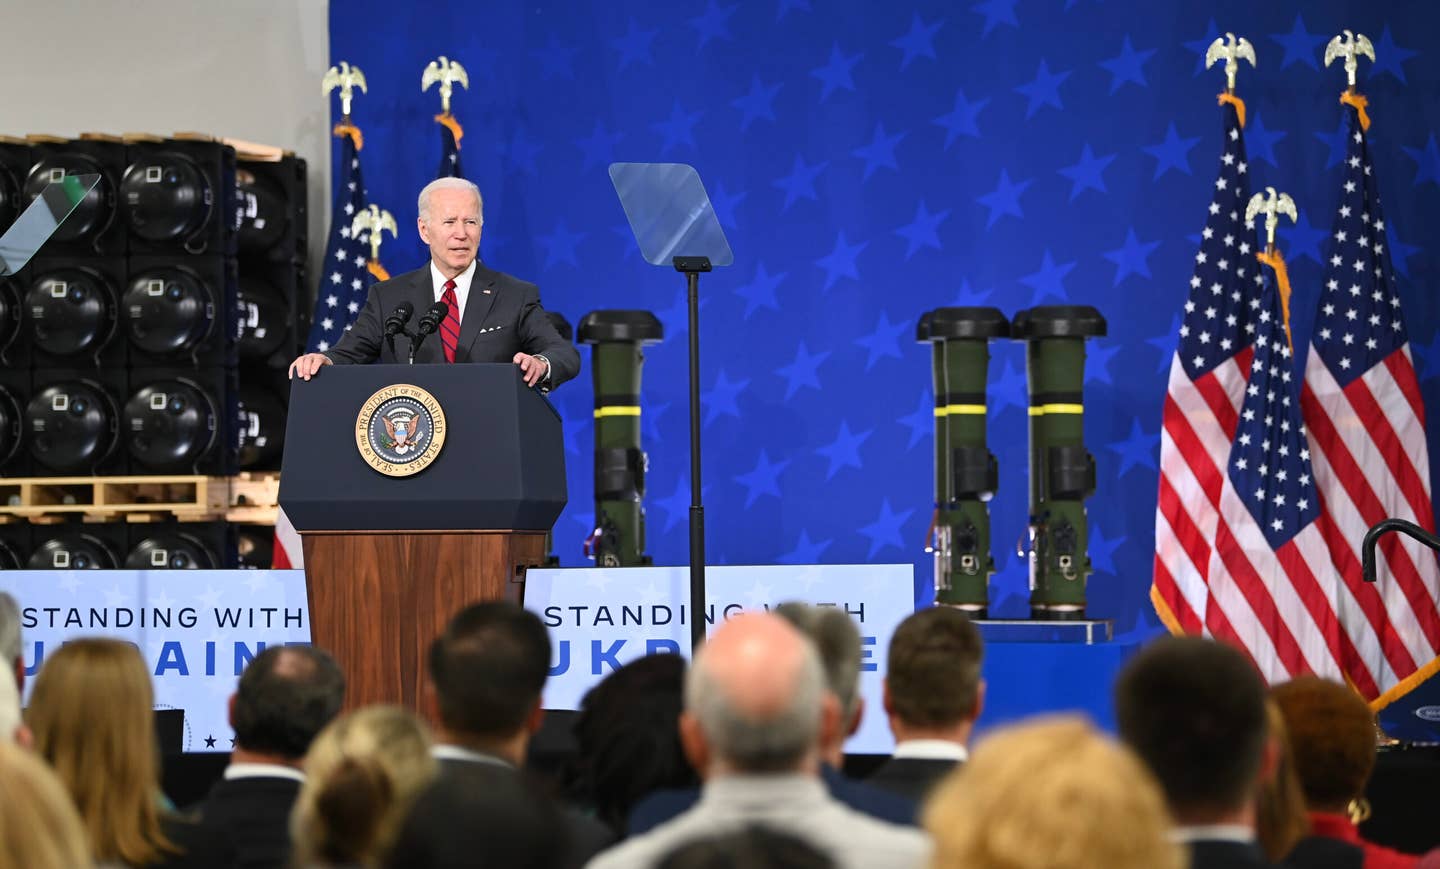 U.S. President Joe Biden speaks to employees at Lockheed Martin, a facility that manufactures weapon systems such as Javelin anti-tank missiles, on May 3, 2022 in Troy, Alabama. (Photo by Julie Bennett/Getty Images)